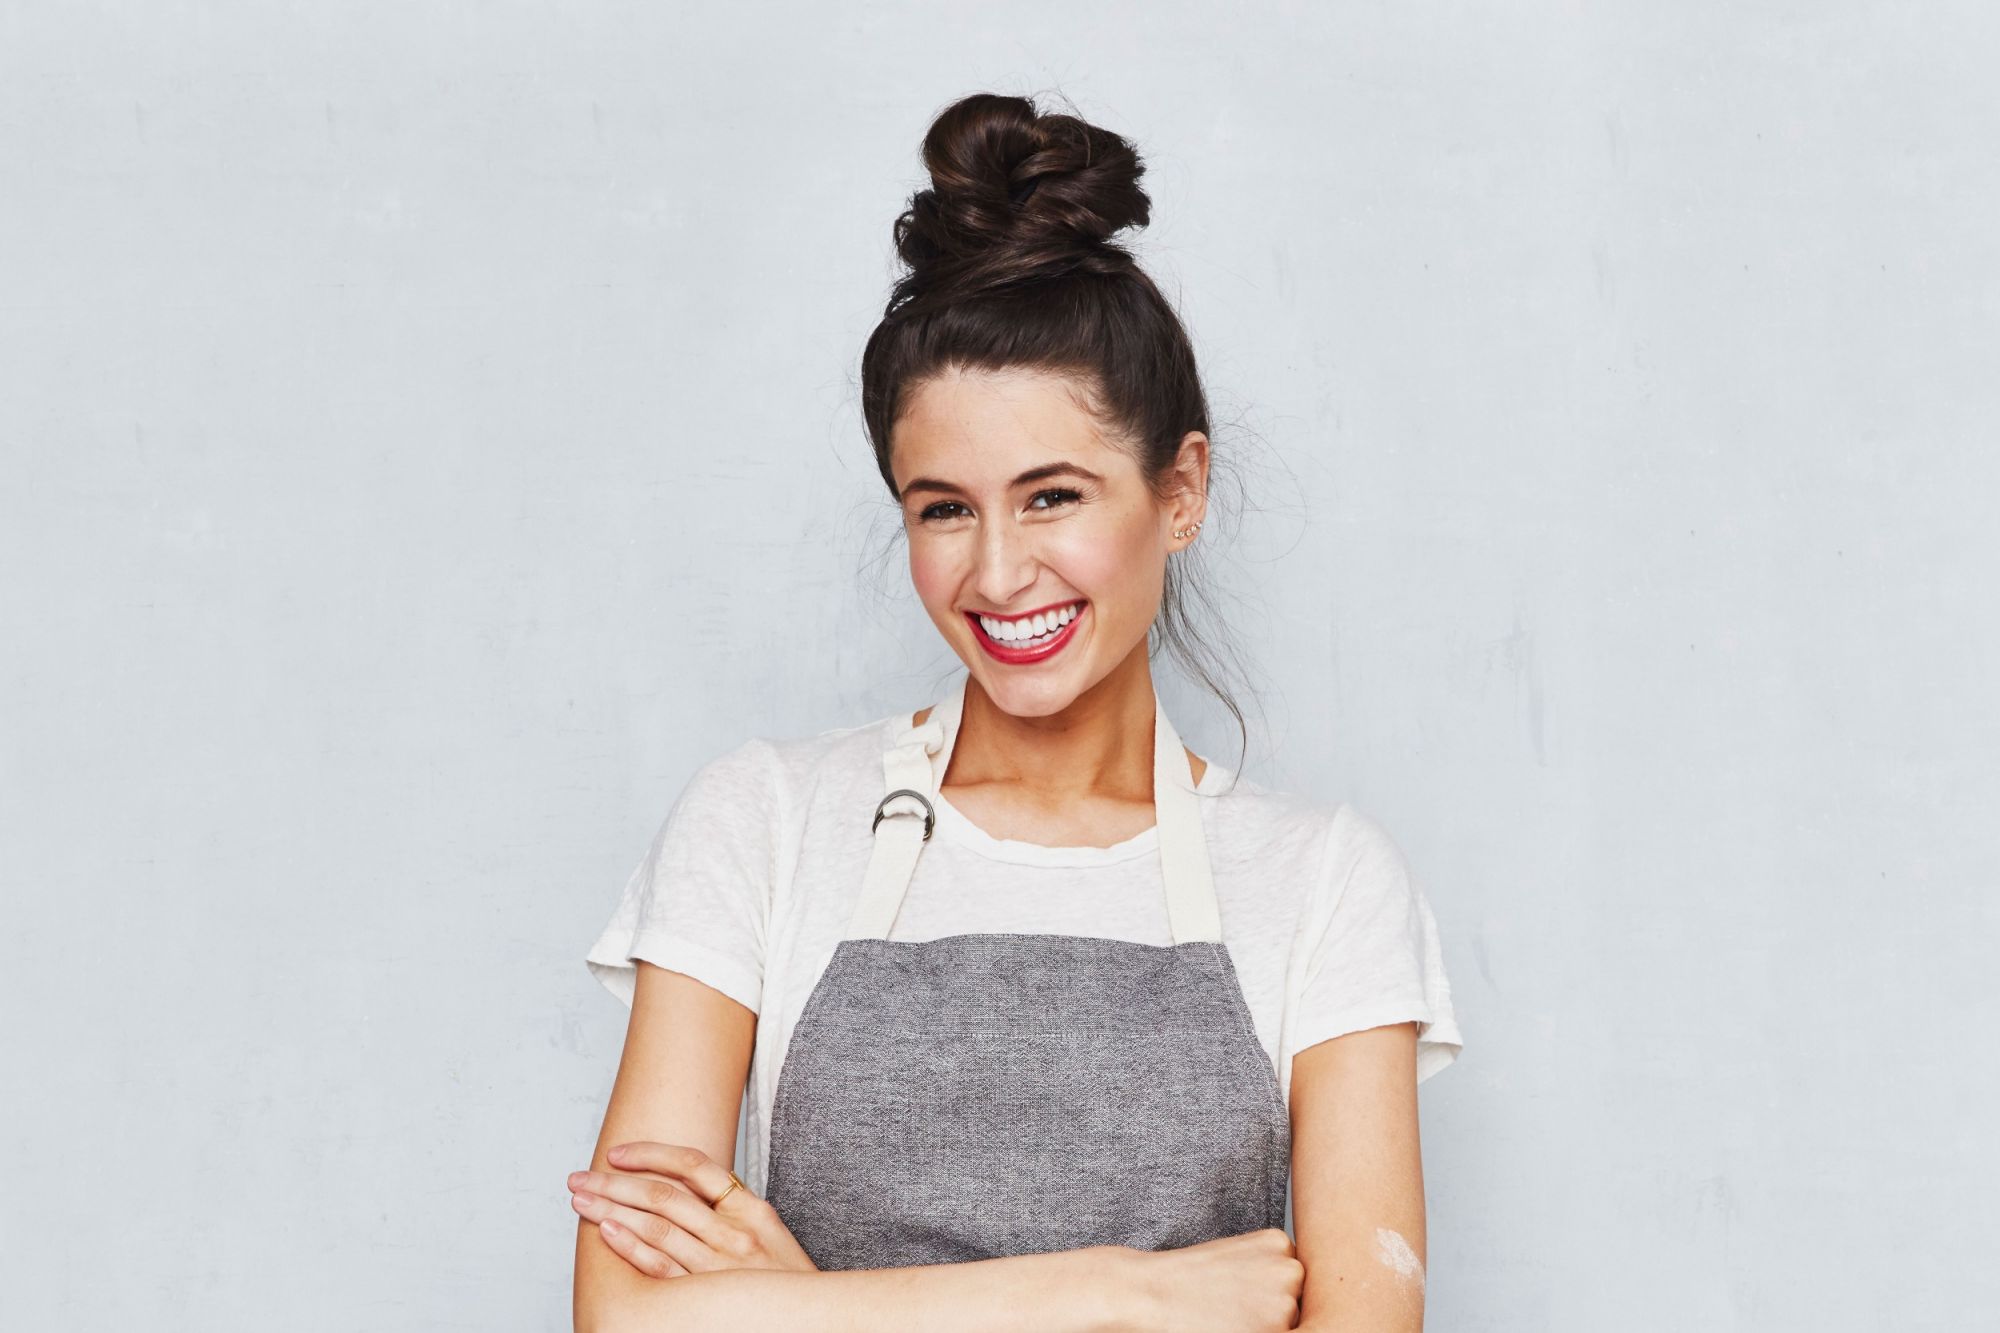 Vegan Celebrity Chef Chloe Coscarelli Says Entrepreneurs Should Push for Change Even When No One Believes in Them